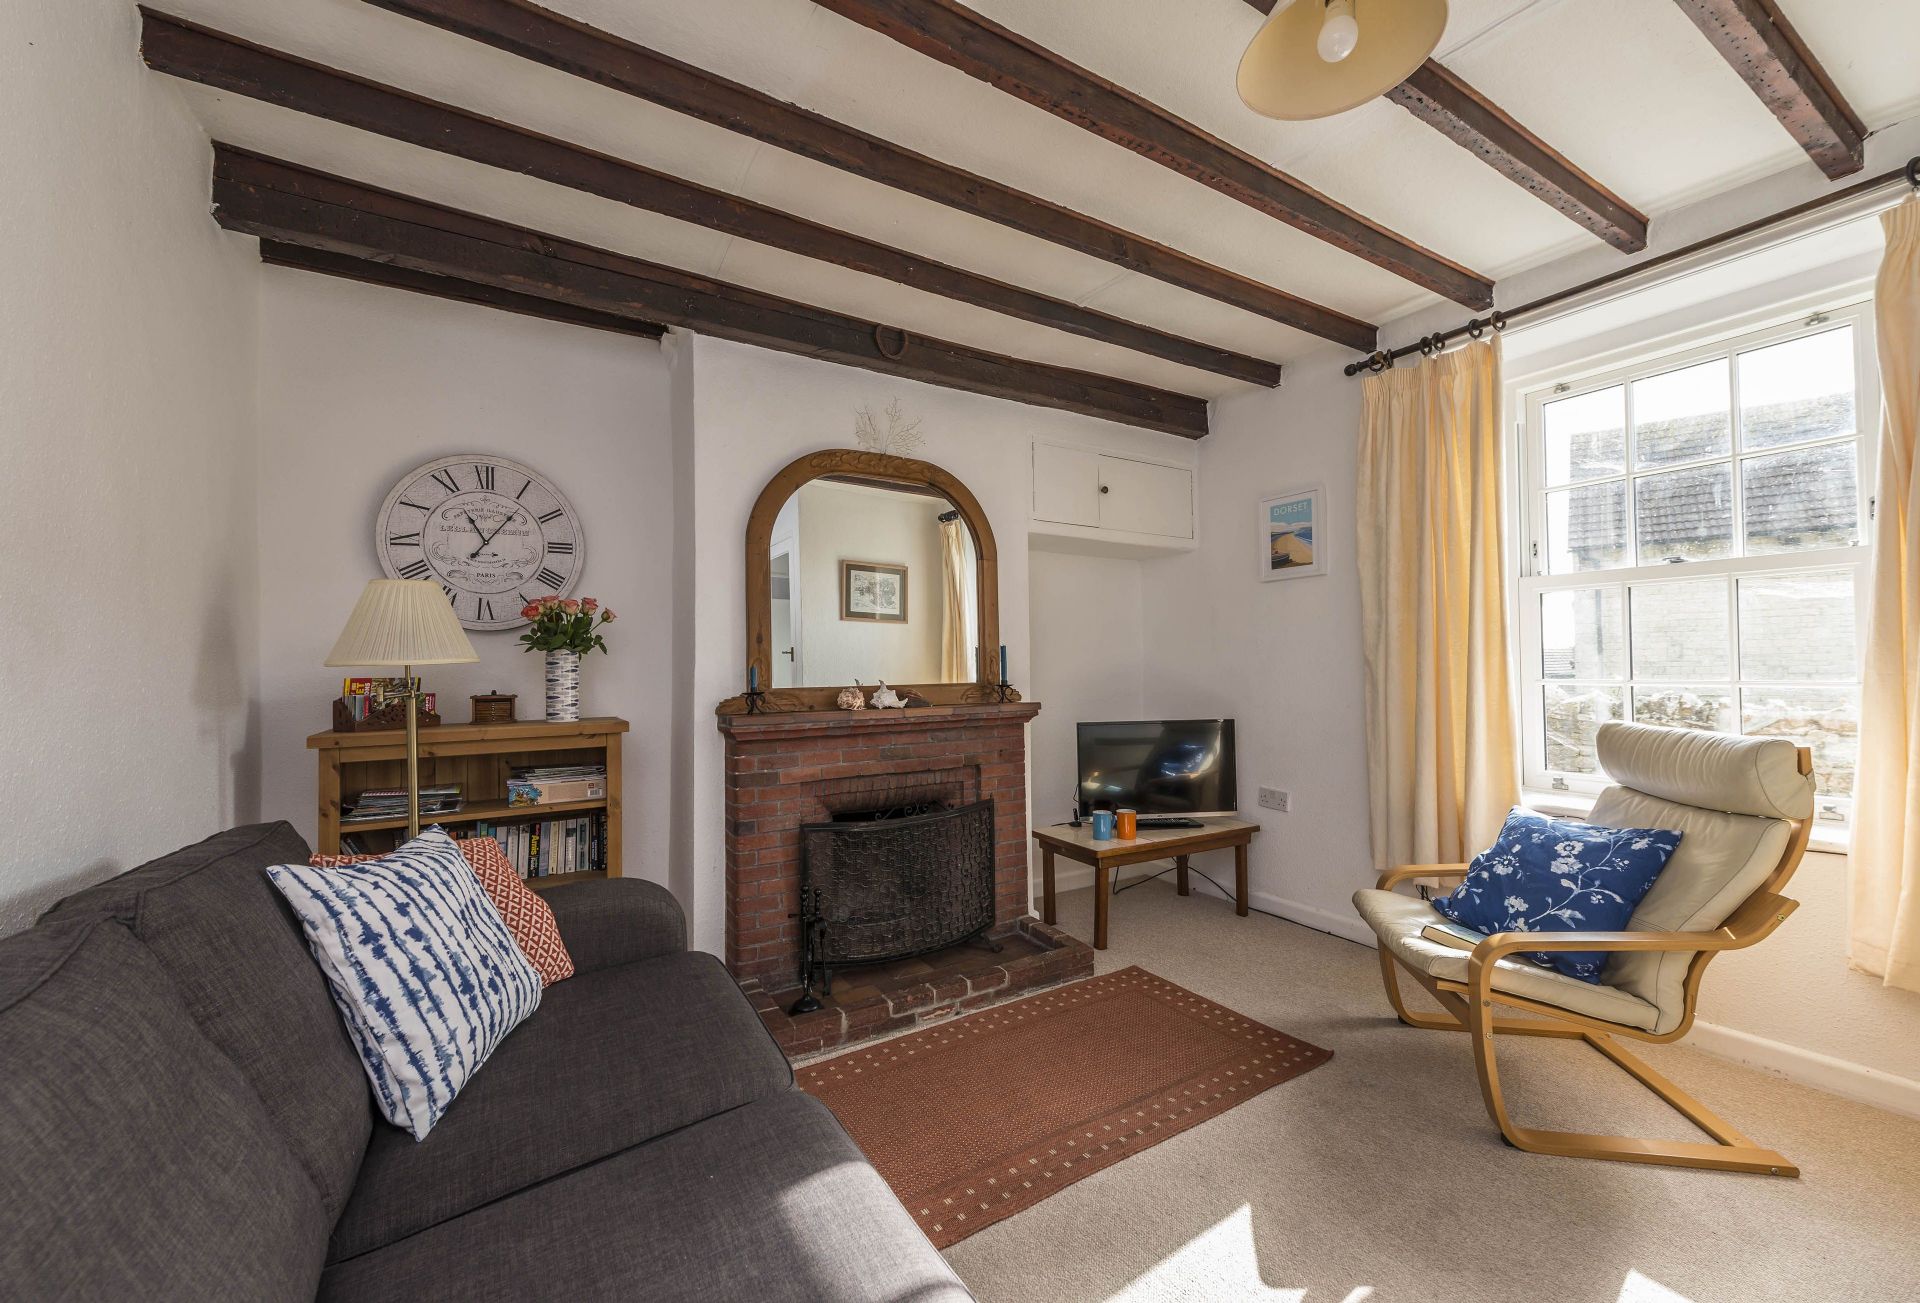 Jurassic Cottage is located in Abbotsbury and surrounding villages